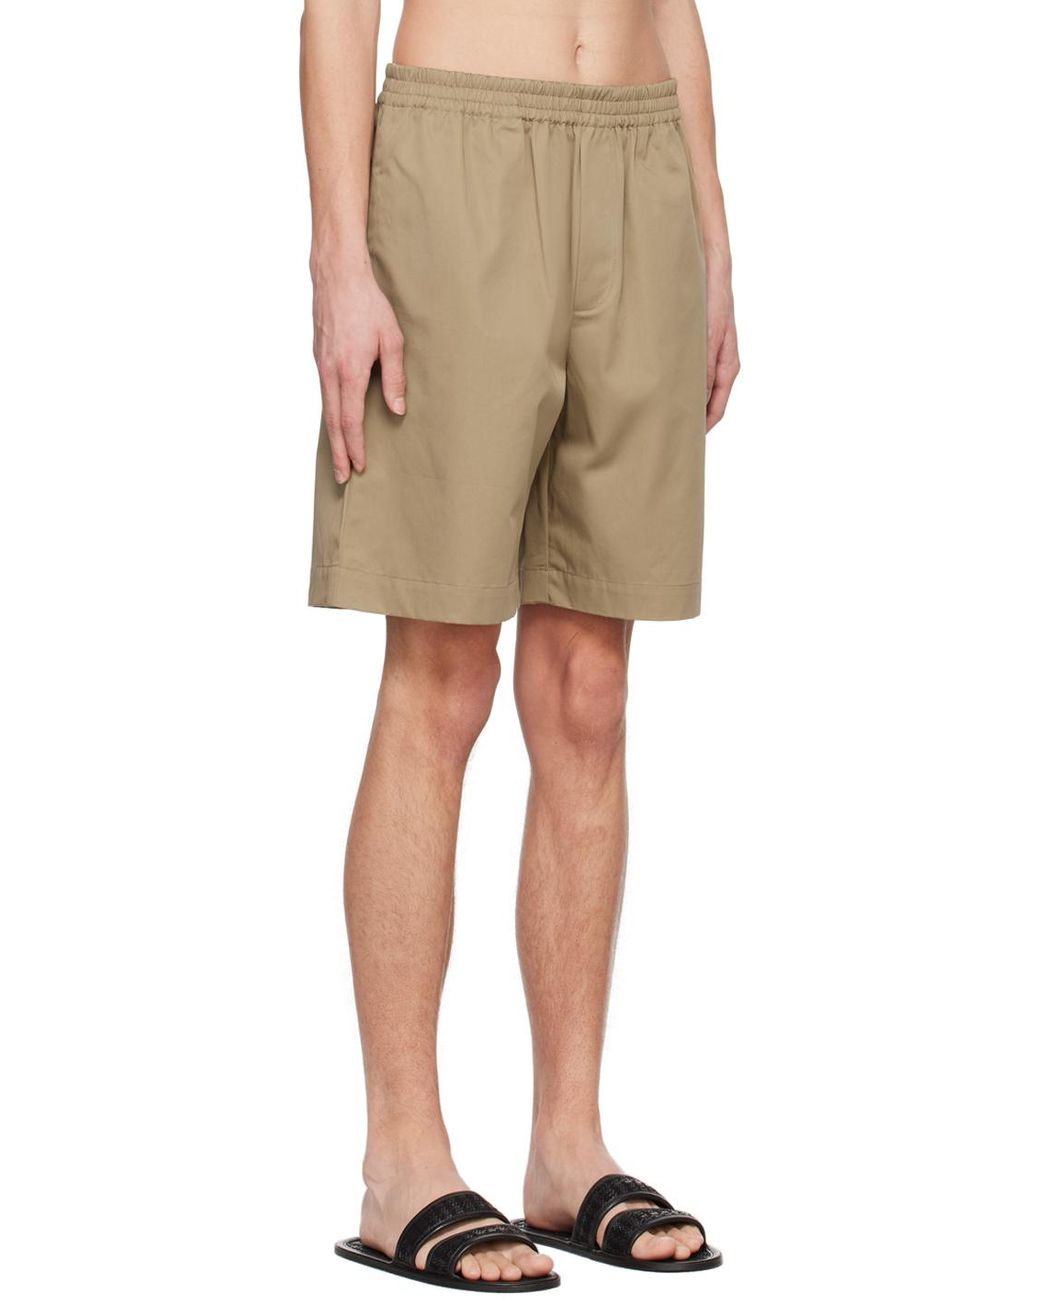 Rohe Elasticized Waistband Shorts in Natural for Men